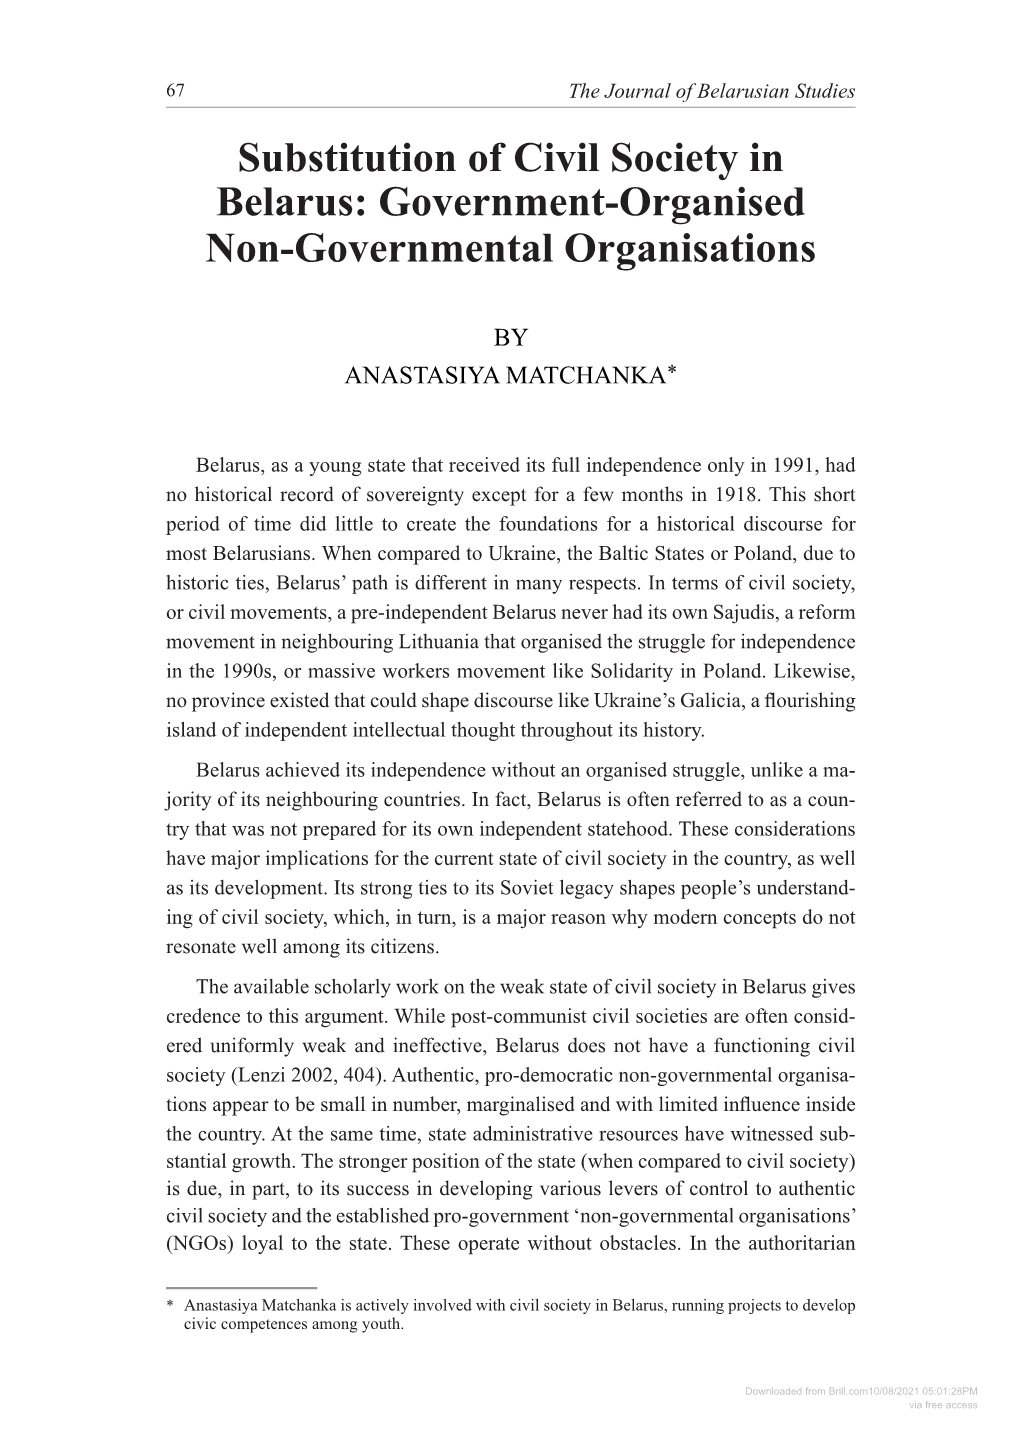 Substitution of Civil Society in Belarus: Government-Organised Non-Governmental Organisations